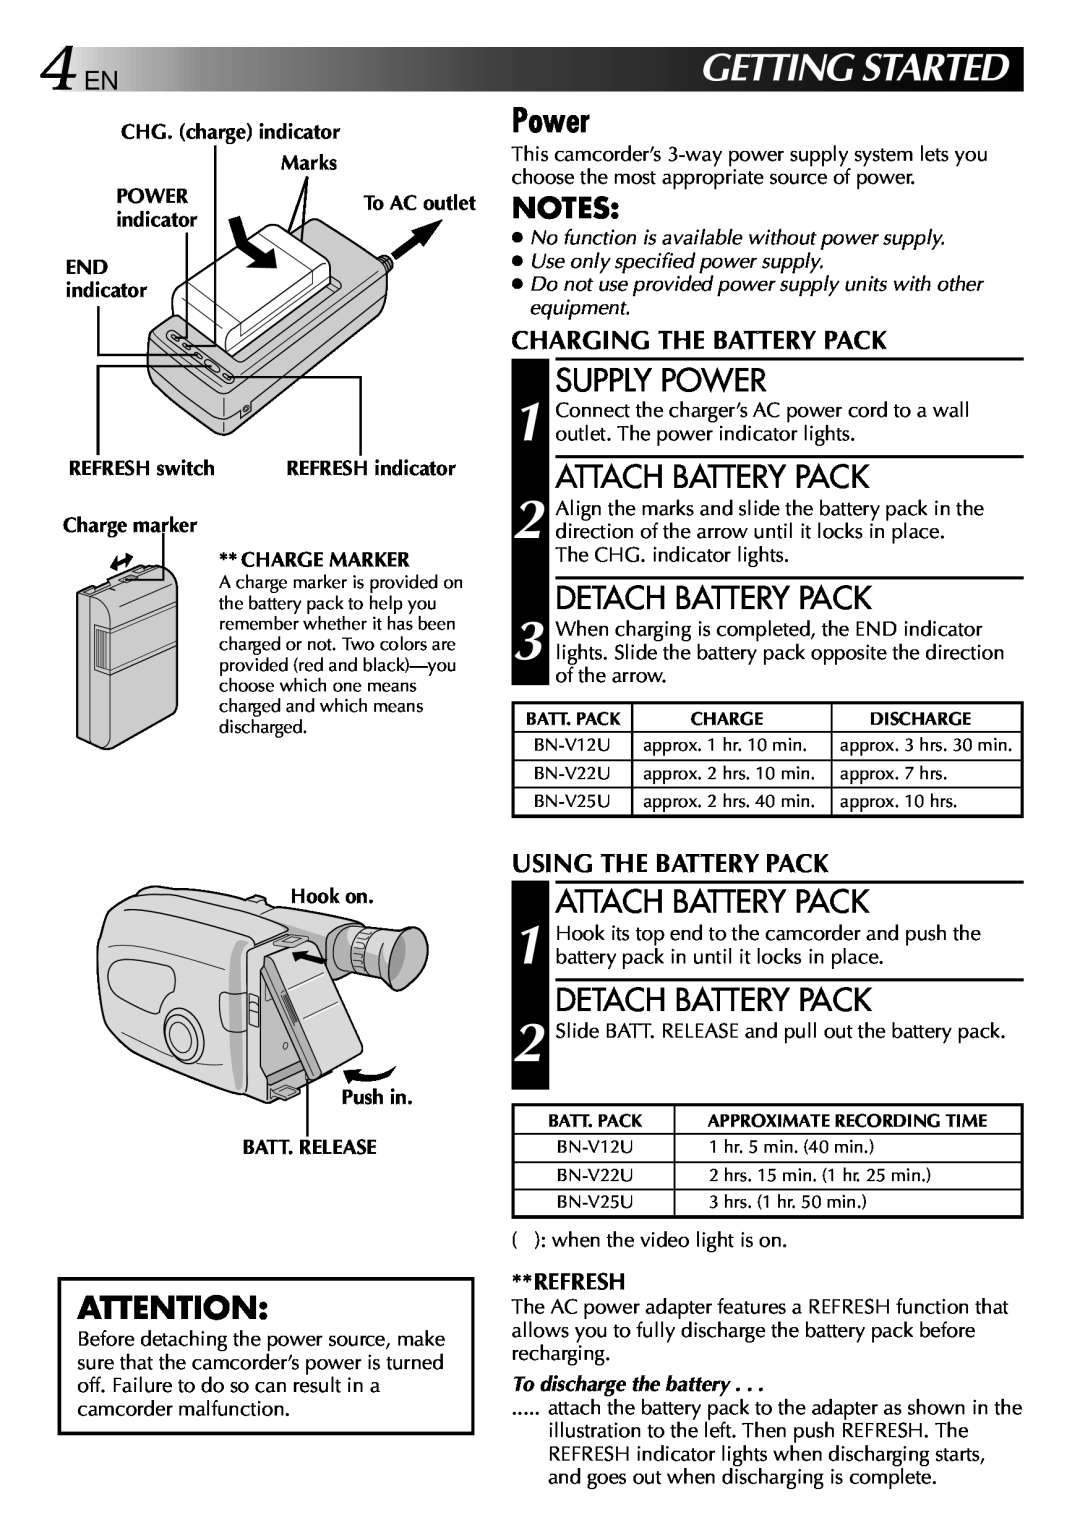 JVC LYT0002-082A Gettingstarted, Supply Power, Attach Battery Pack, Detach Battery Pack, Charging The Battery Pack 